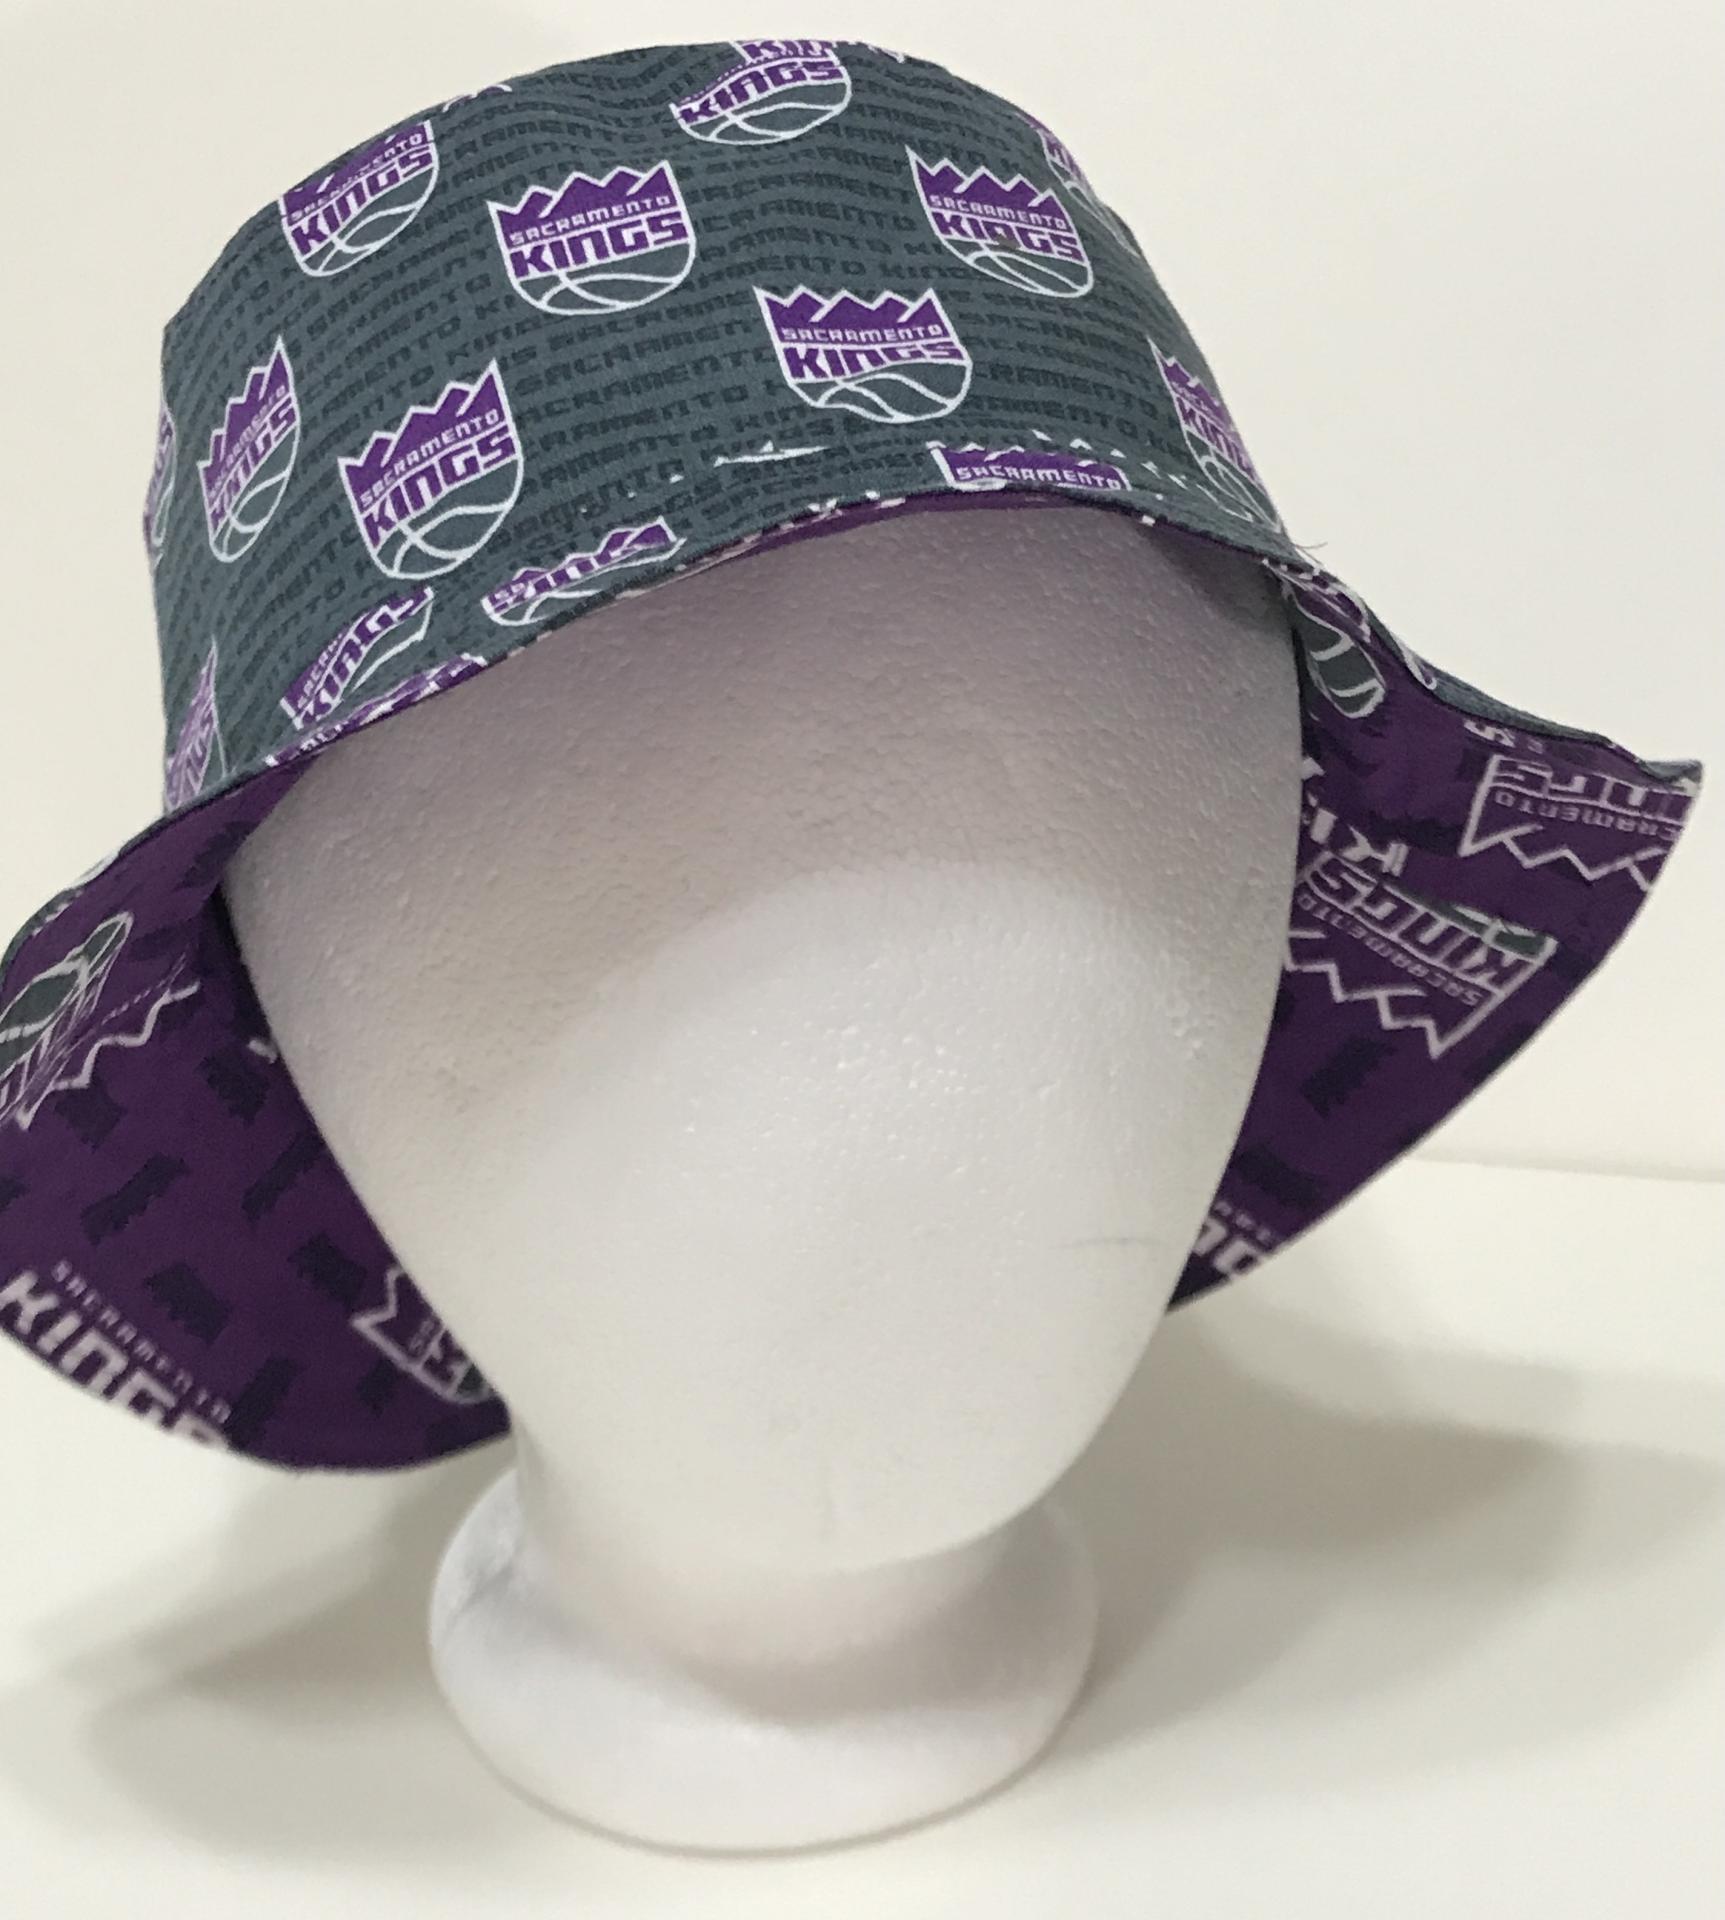 Front view, Sacramento Kings bucket hat, purple logo on grey background fabric facing out